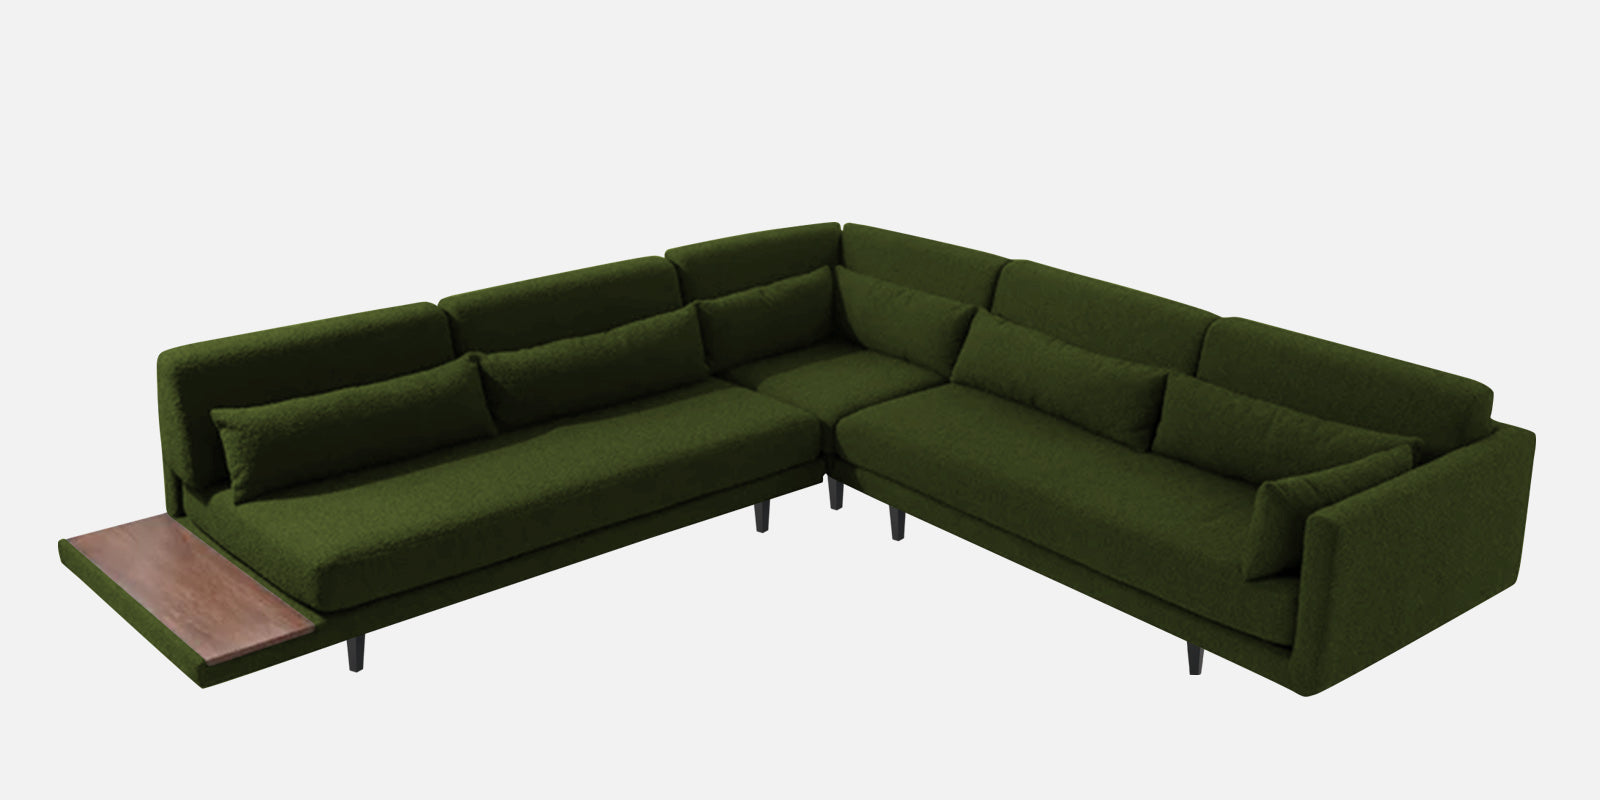 Malta Fabric 6 Seater RHS Sectional Sofa In Olive Green Colour